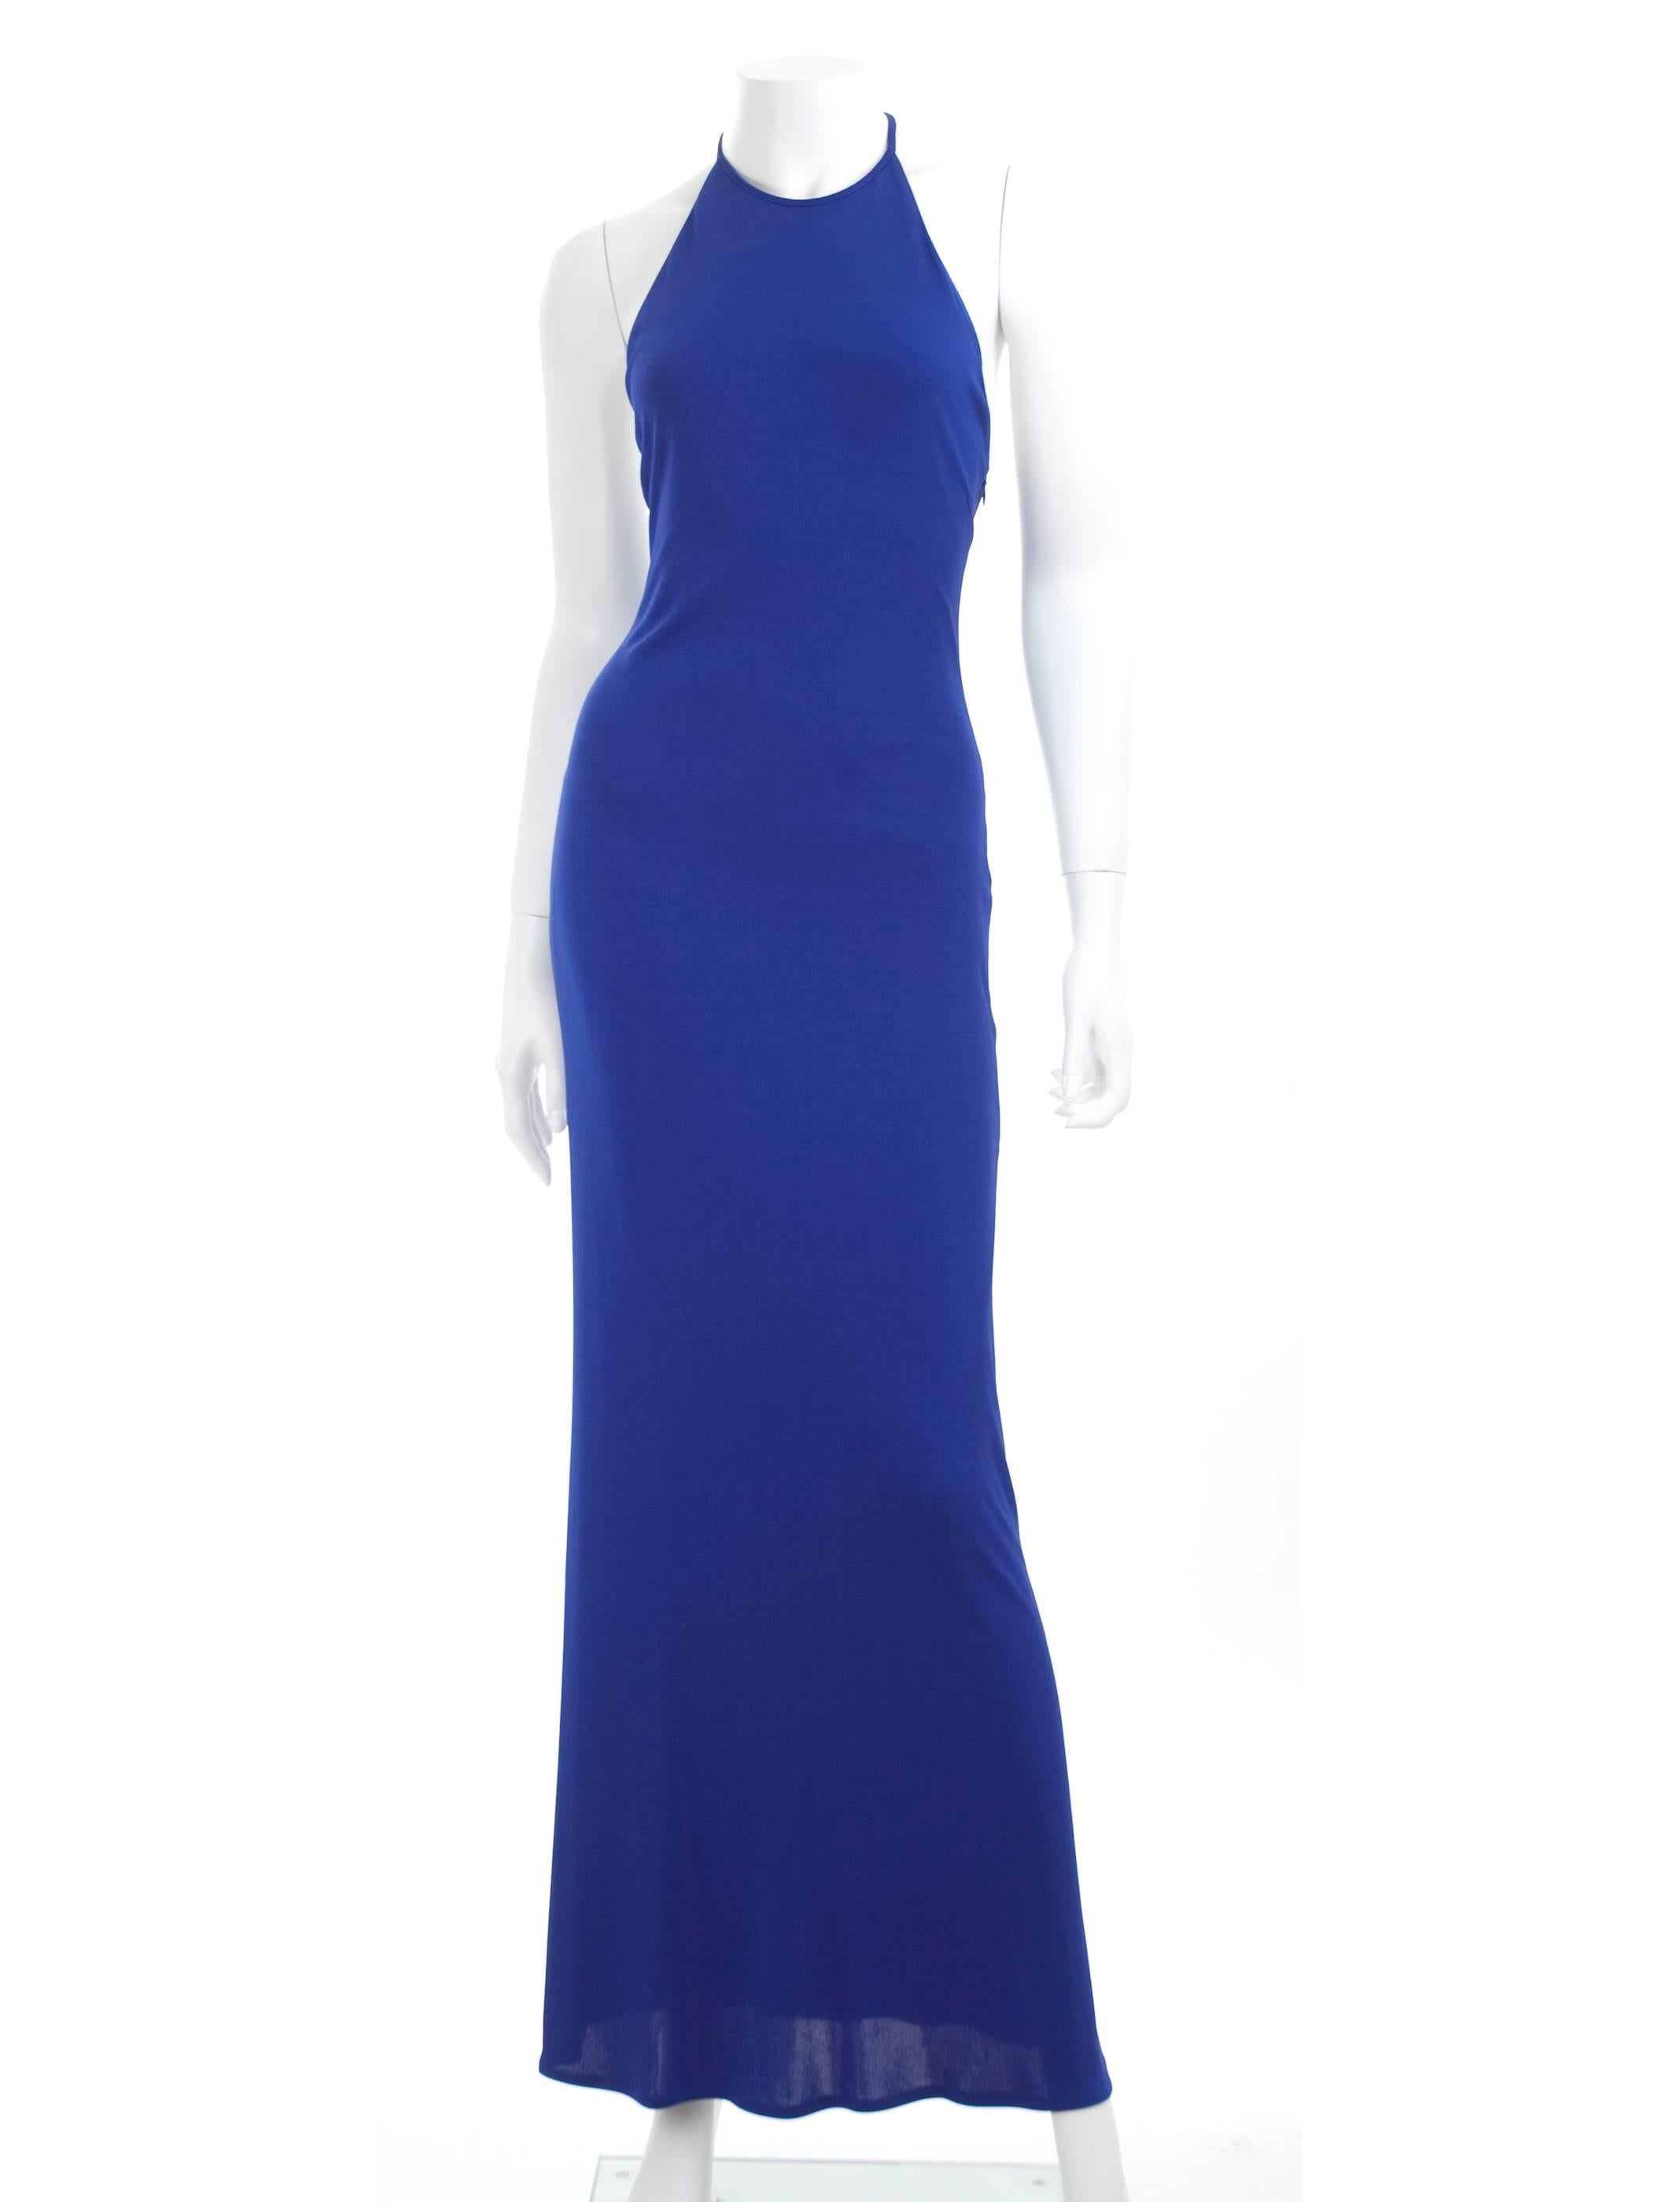 Emilio Pucci evening dress in blue viscose jersey. Wonderful back detail, beads on a multi blue pattern stripe. Closure around the neck with a hook, side zipper.
In excellent condition.
Measurements:
Length 56 - bust 33 - waist 26 inches
